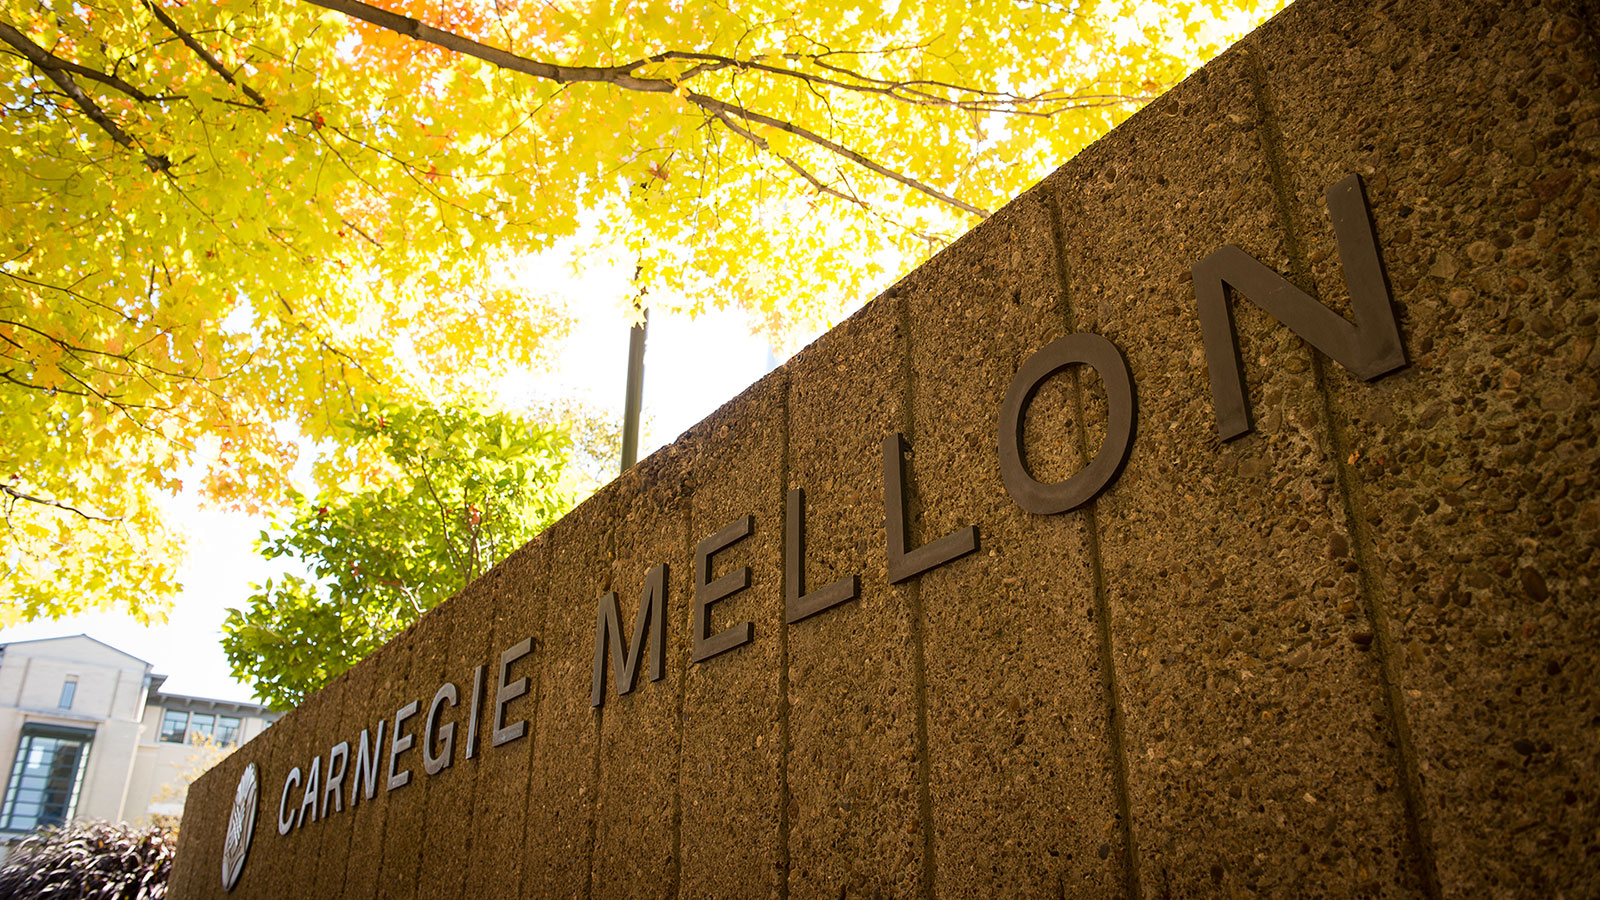 The achievements of Carnegie Mellon’s students, faculty, and alumni demonstrate the power of education, just as Andrew Carnegie intended.